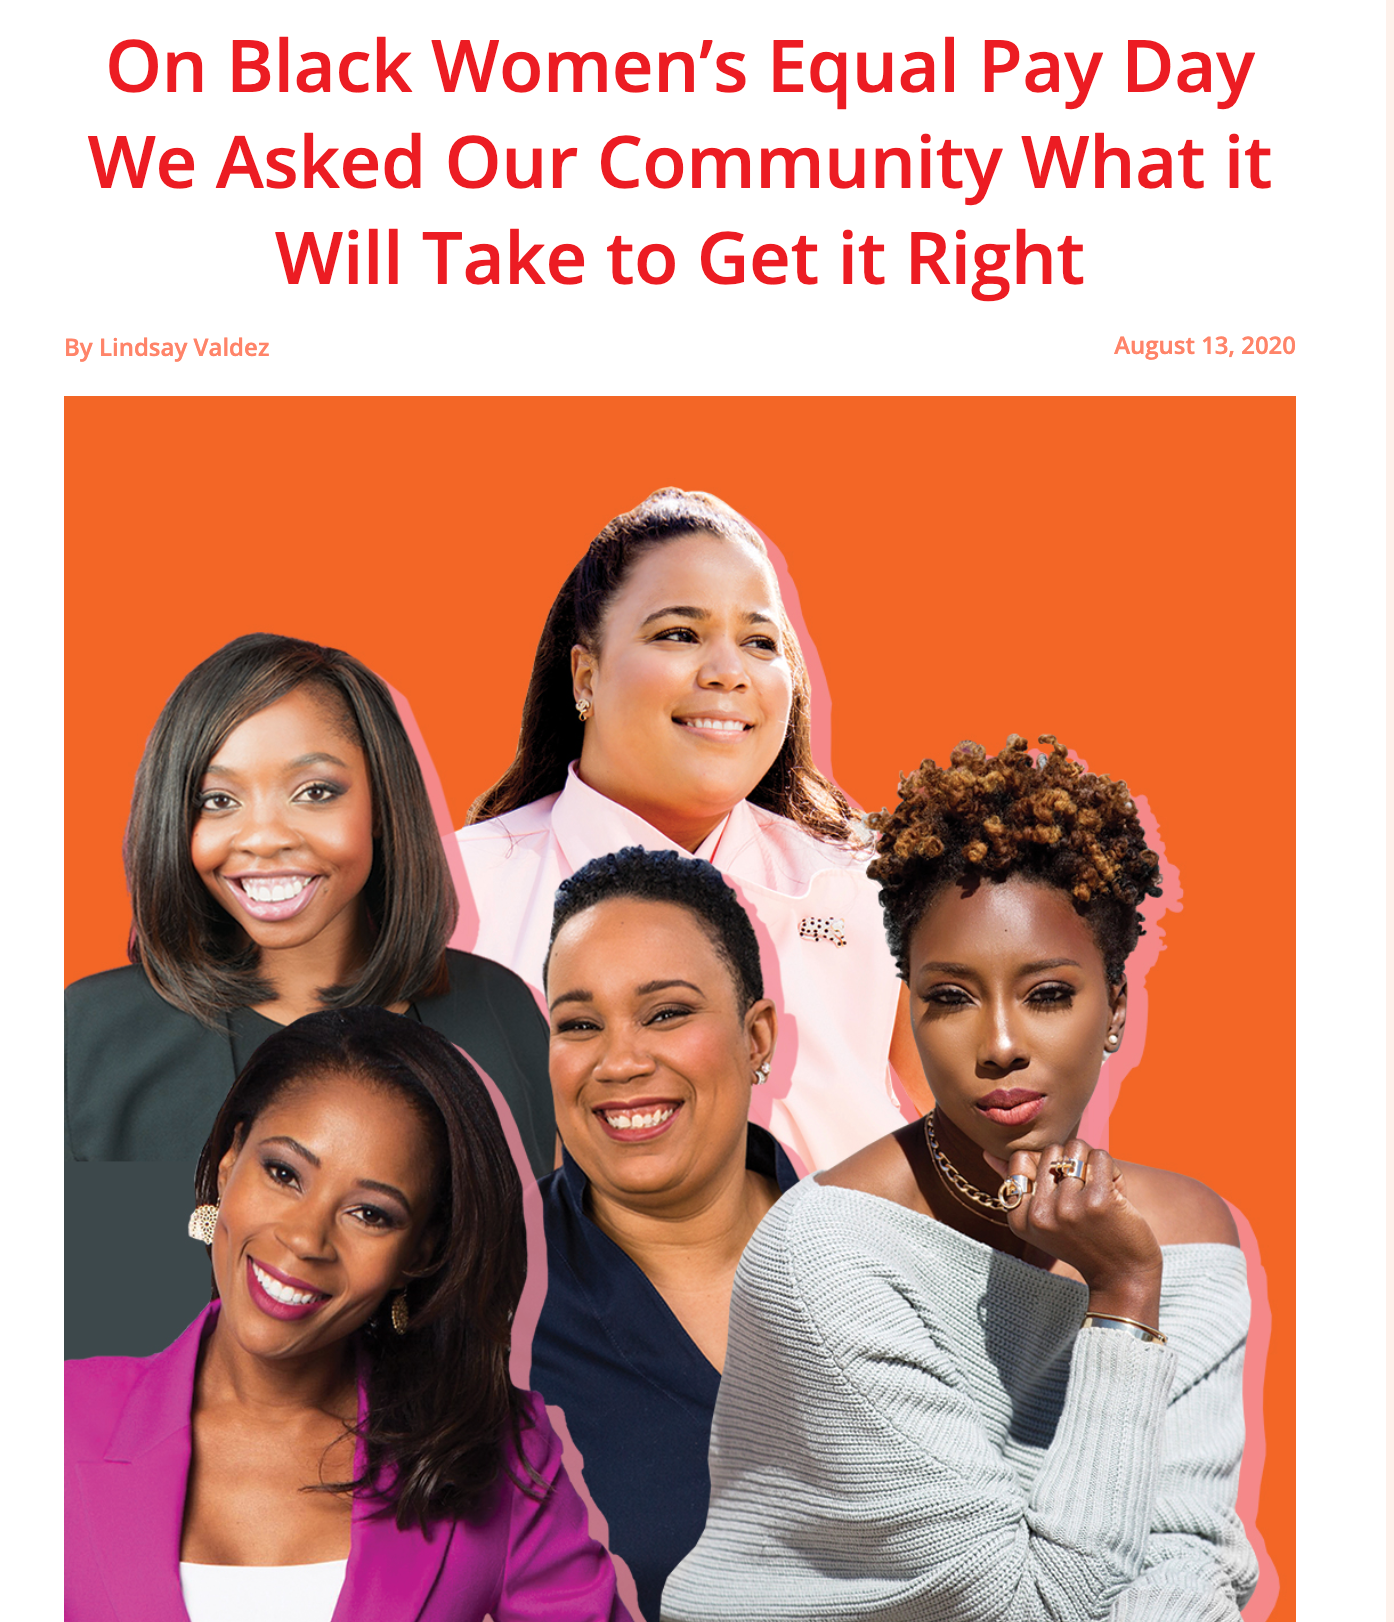 On Black Women’s Equal Pay Day We Asked Our Community What it Will Take to Get it Right